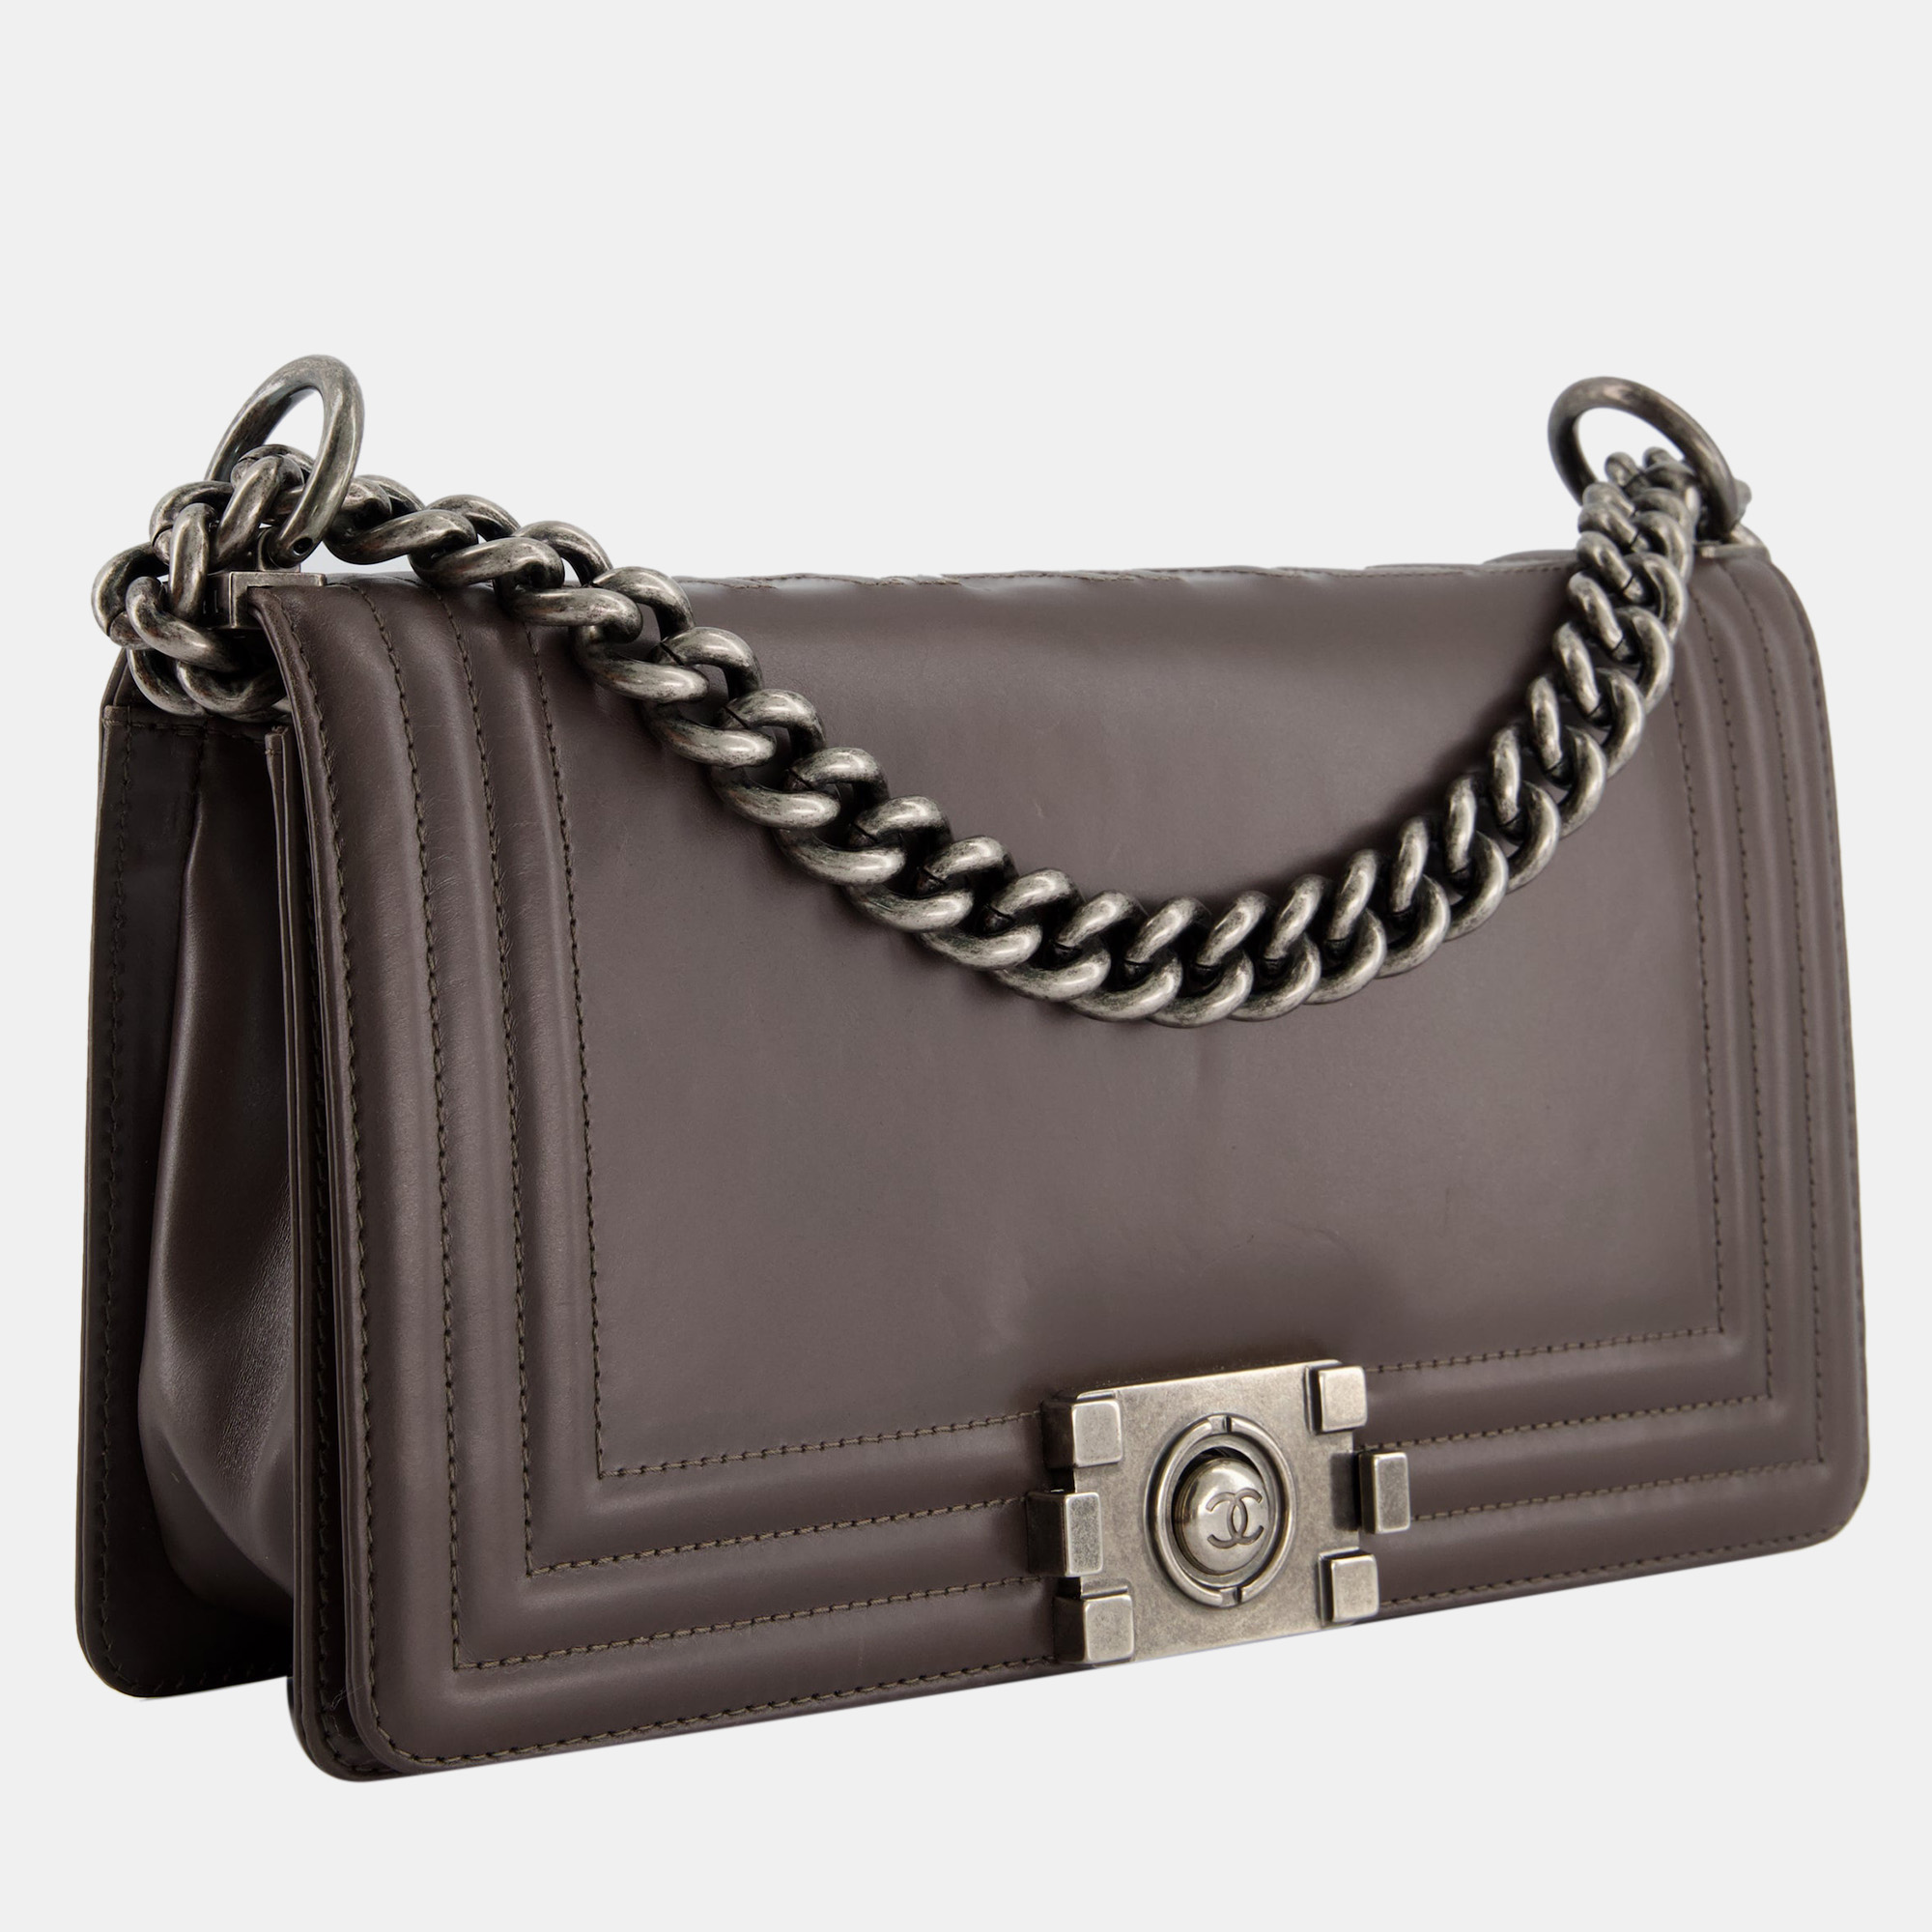 Chanel Chocolate Brown Smooth Calfskin Leather Boy Bag With Stitched Chanel Logo Detail And Gunmetal Hardware